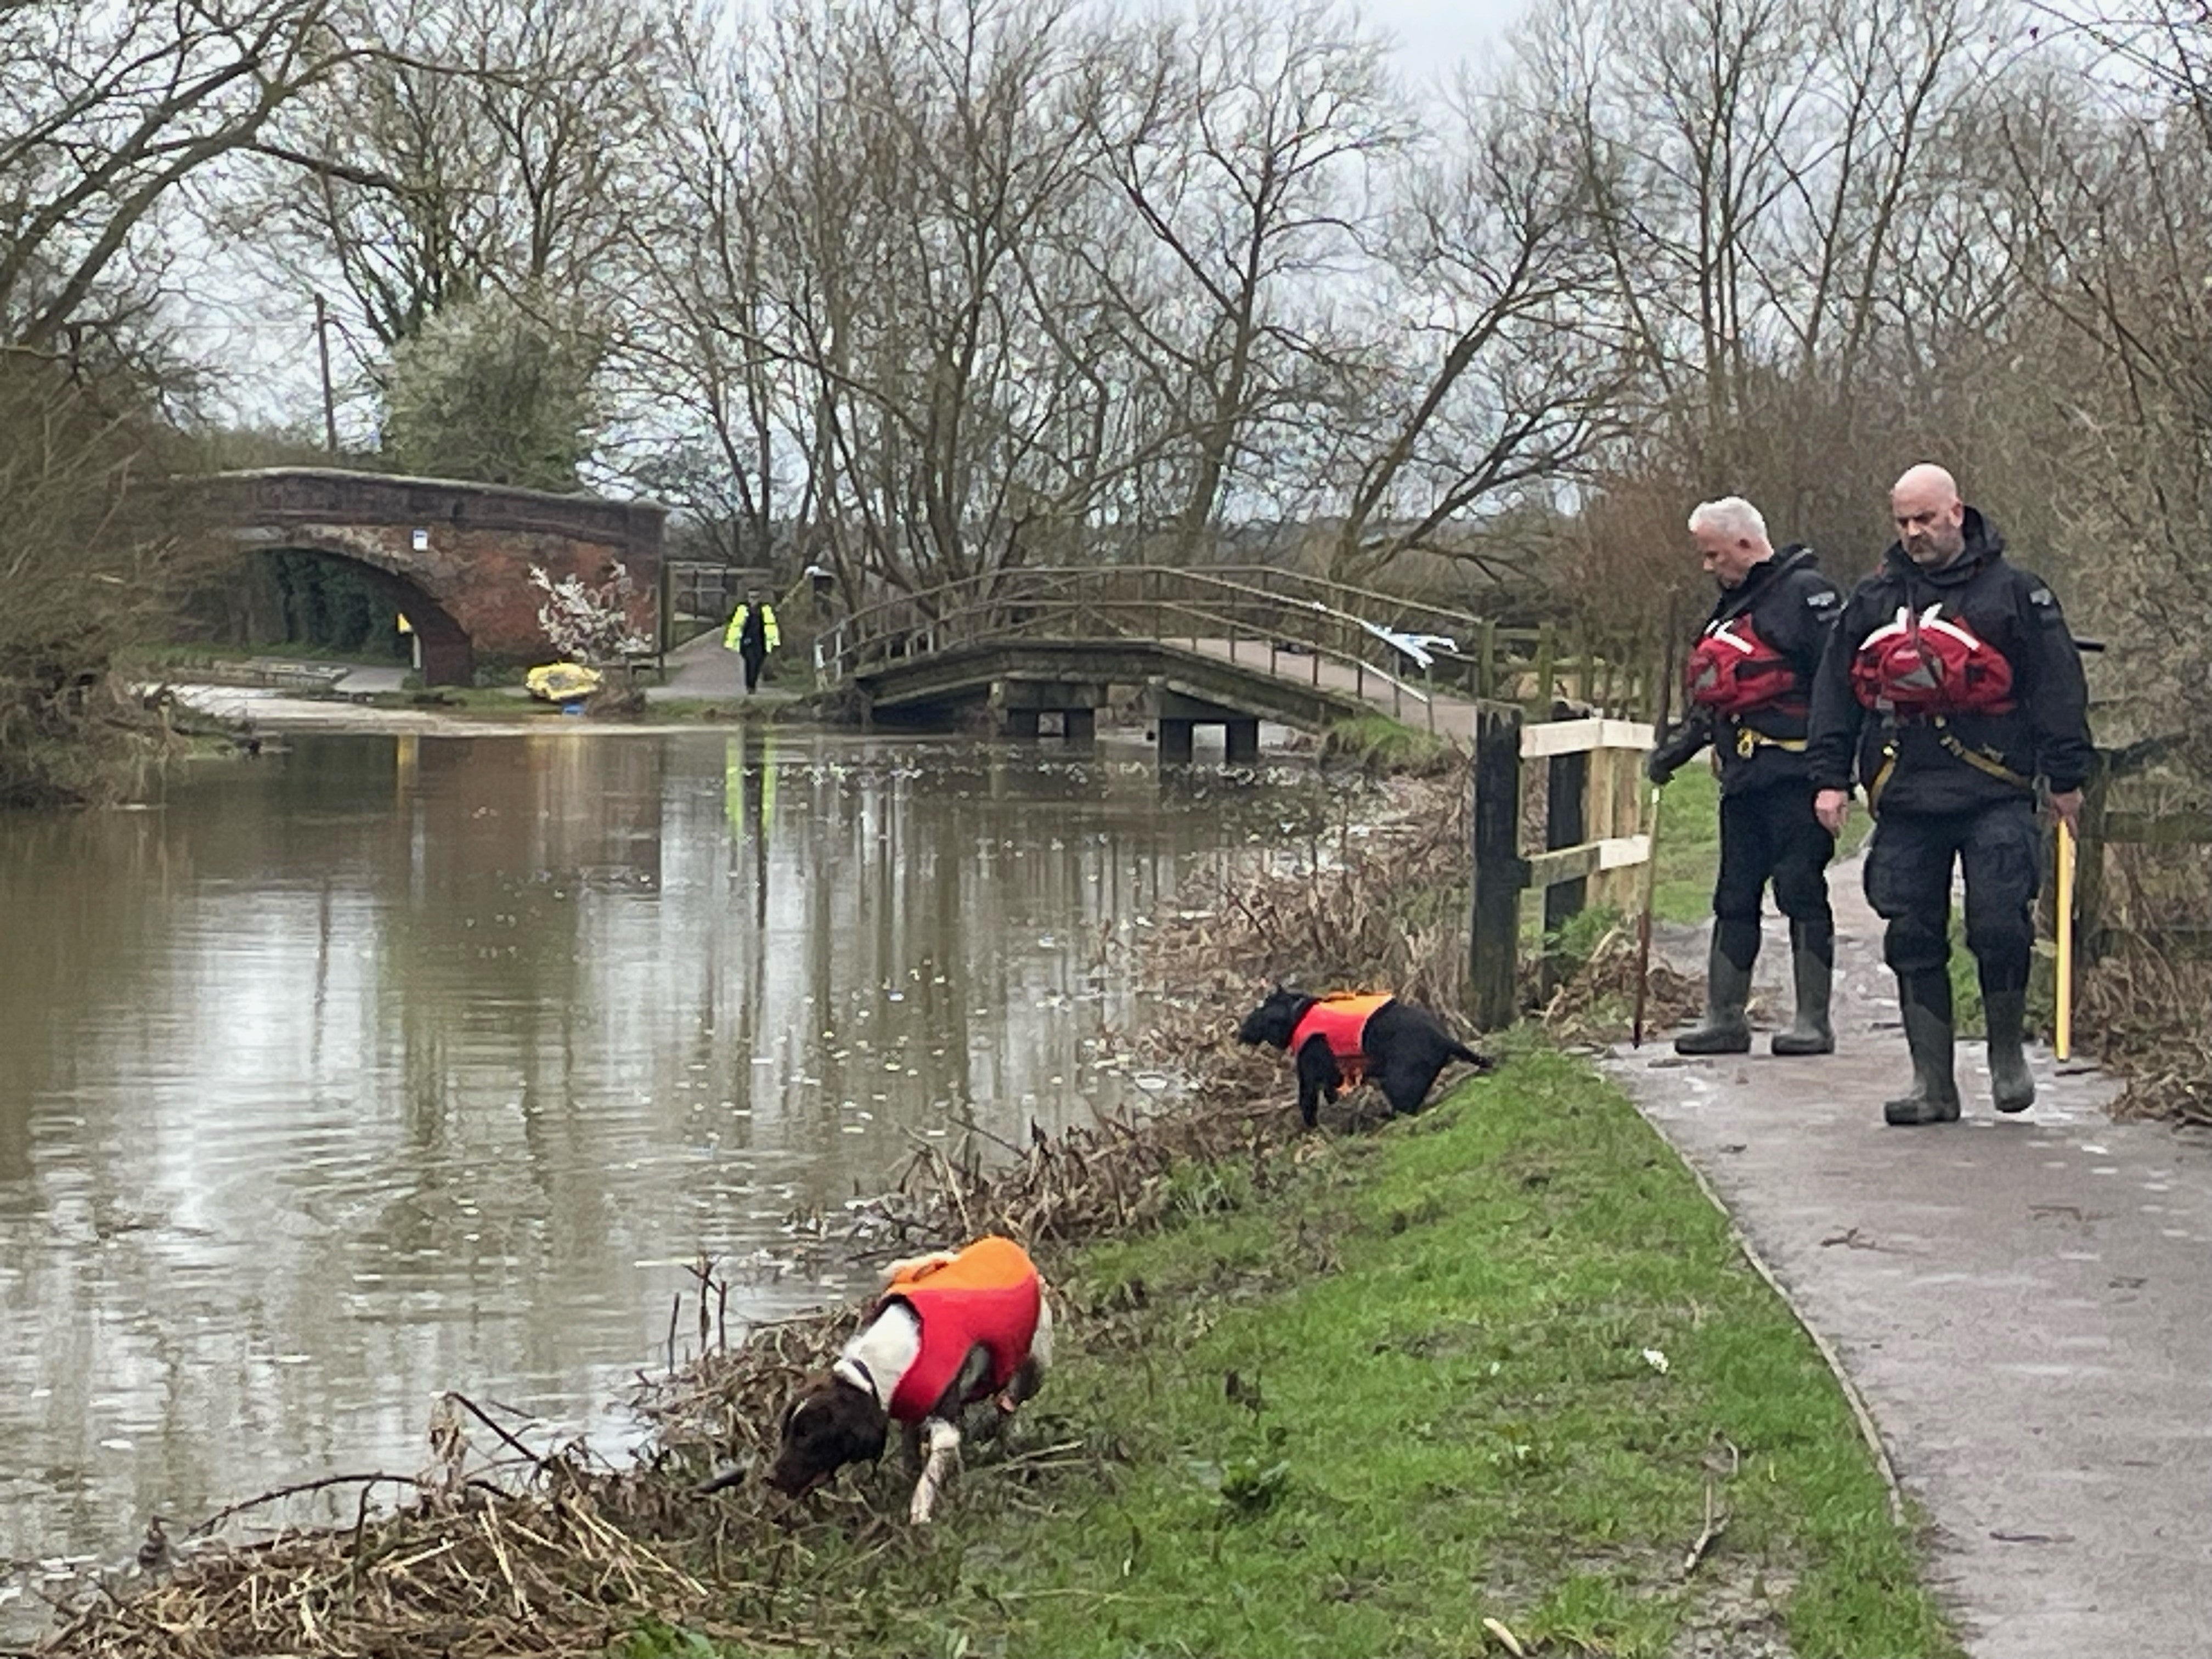 Specialist divers have been drafted in to help with the search